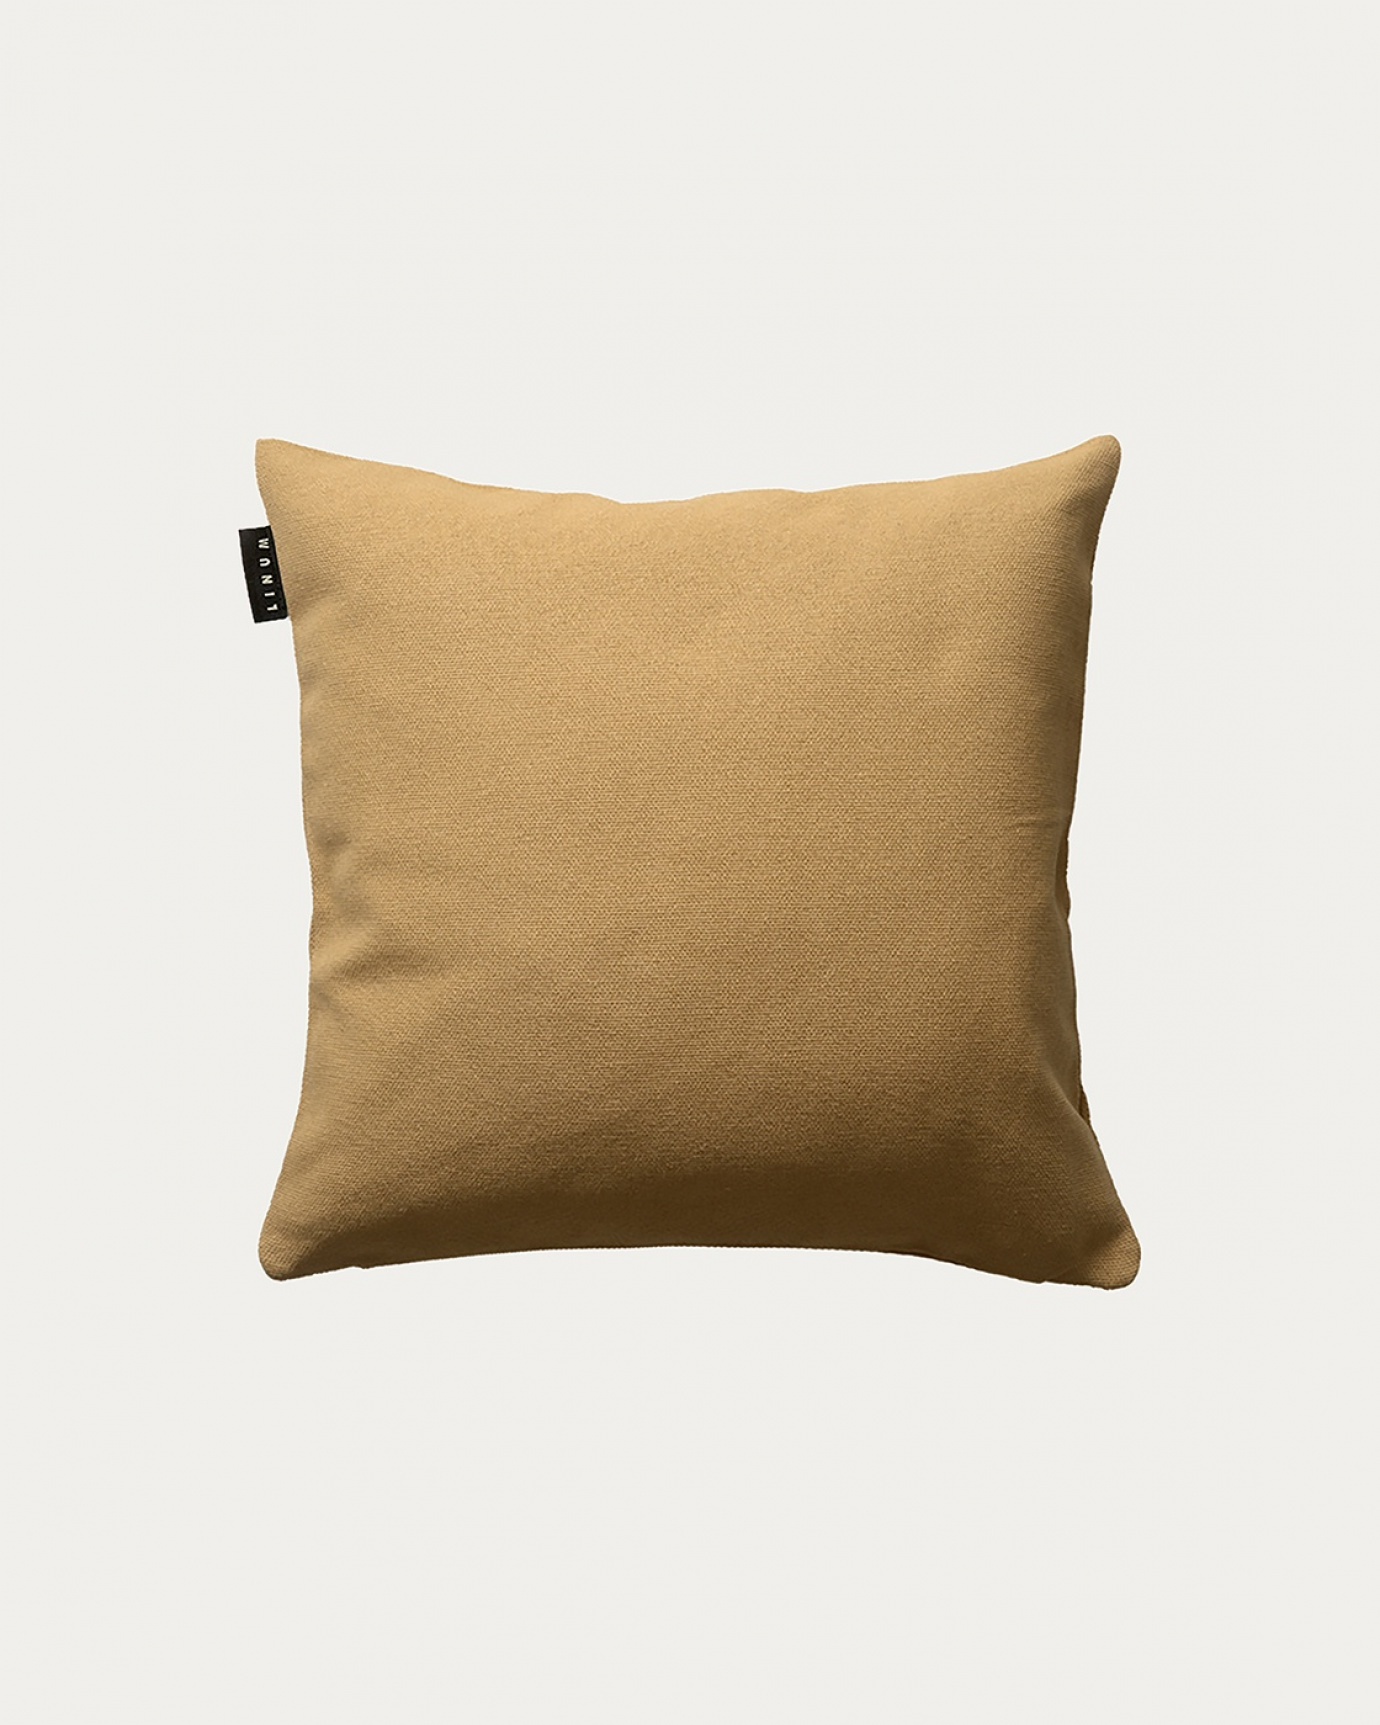 Product image straw yellow PEPPER cushion cover made of soft cotton from LINUM DESIGN. Easy to wash and durable for generations. Size 40x40 cm.